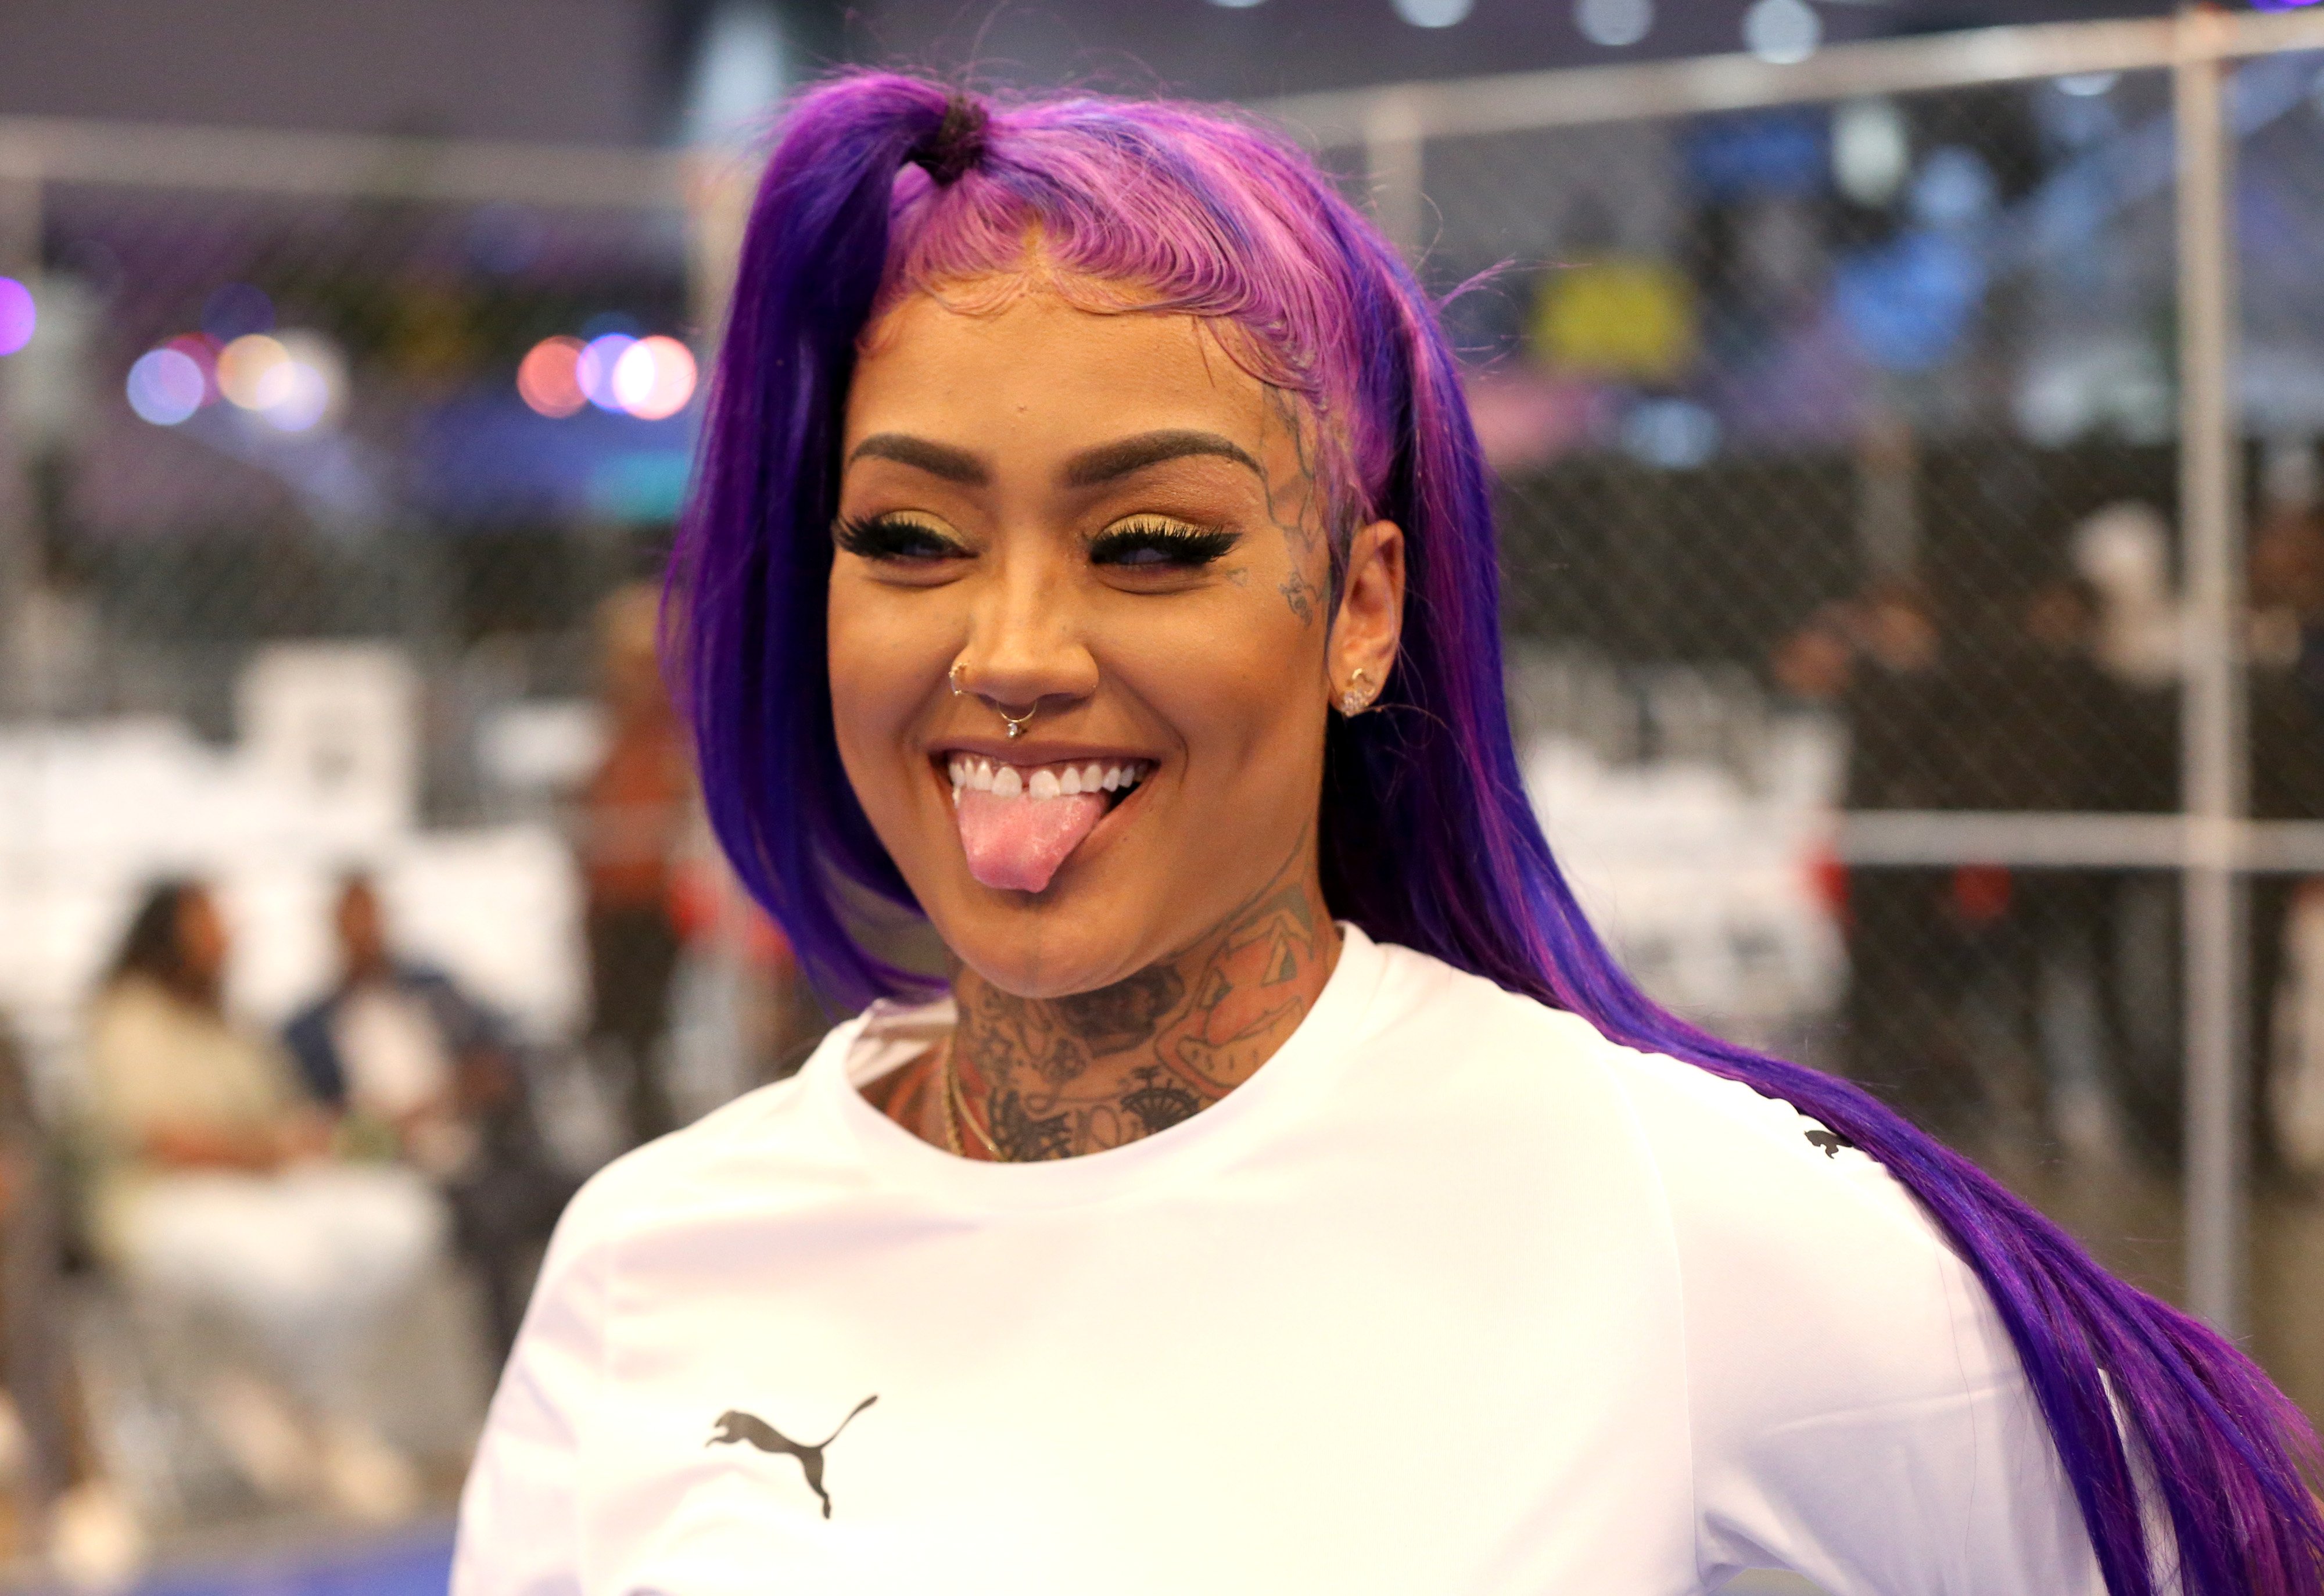 Donna Lombardi playfully sticking her tongue out during the 2019 BET Experience Celebrity Dodgeball Game